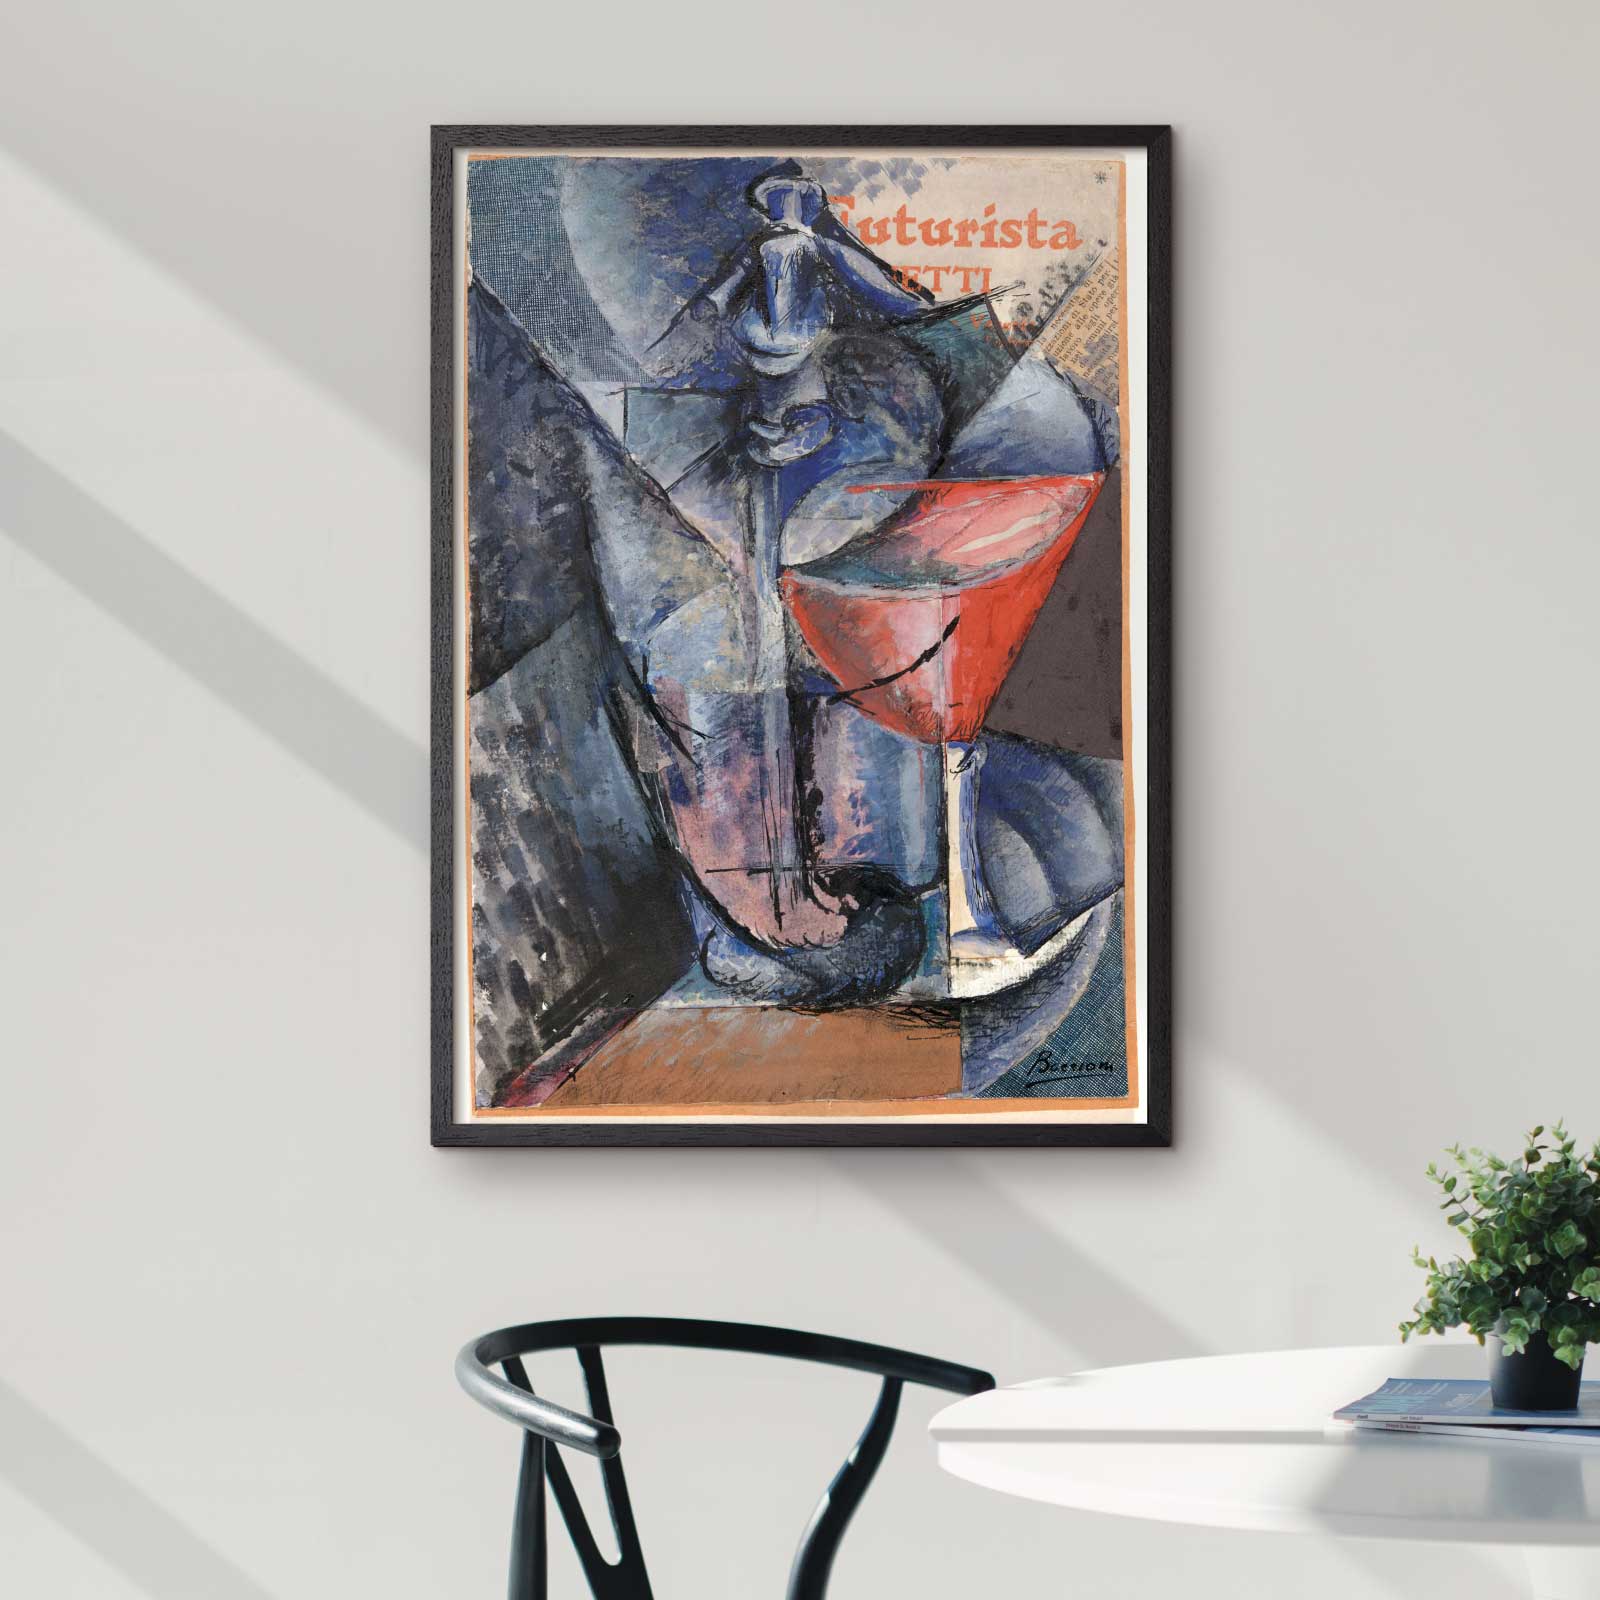 Art poster featuring "Glass and Siphon" by Umberto  Boccioni